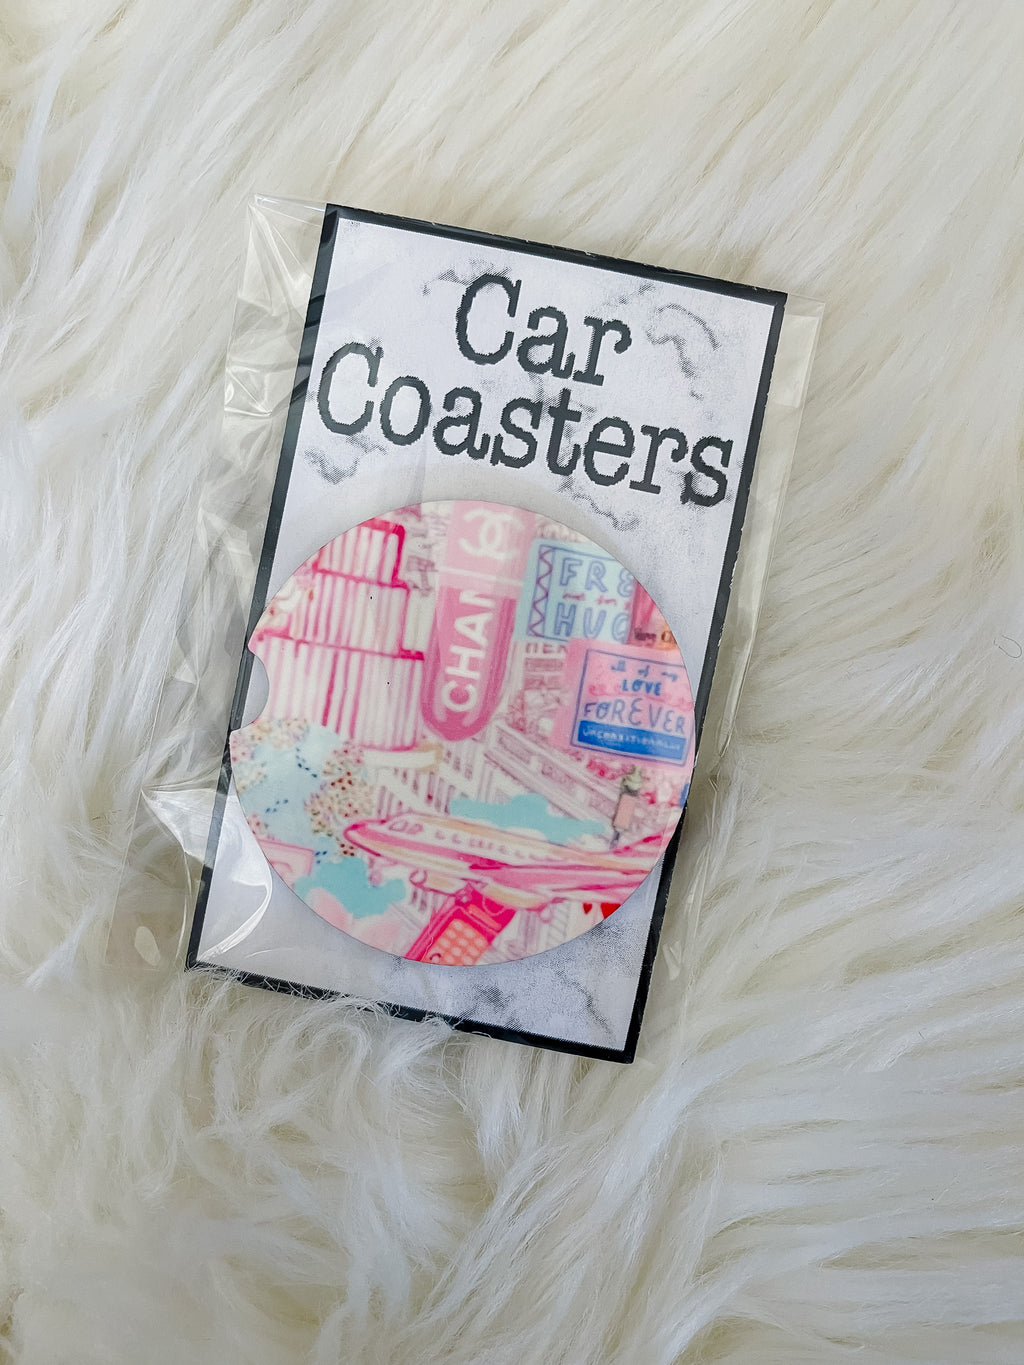 Don't Eff Up My Car Car Coasters On The Go - STB Boutique